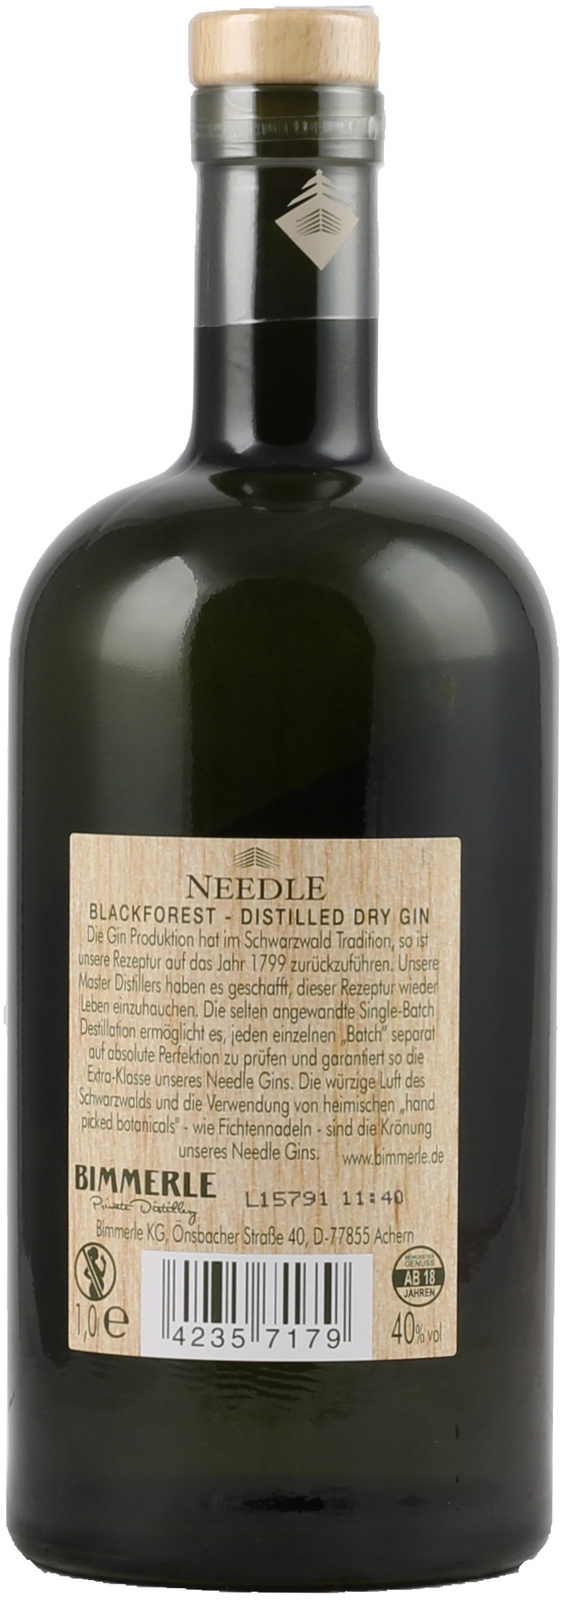 Needle Black Forest Dry Gin Onlineshop im hier